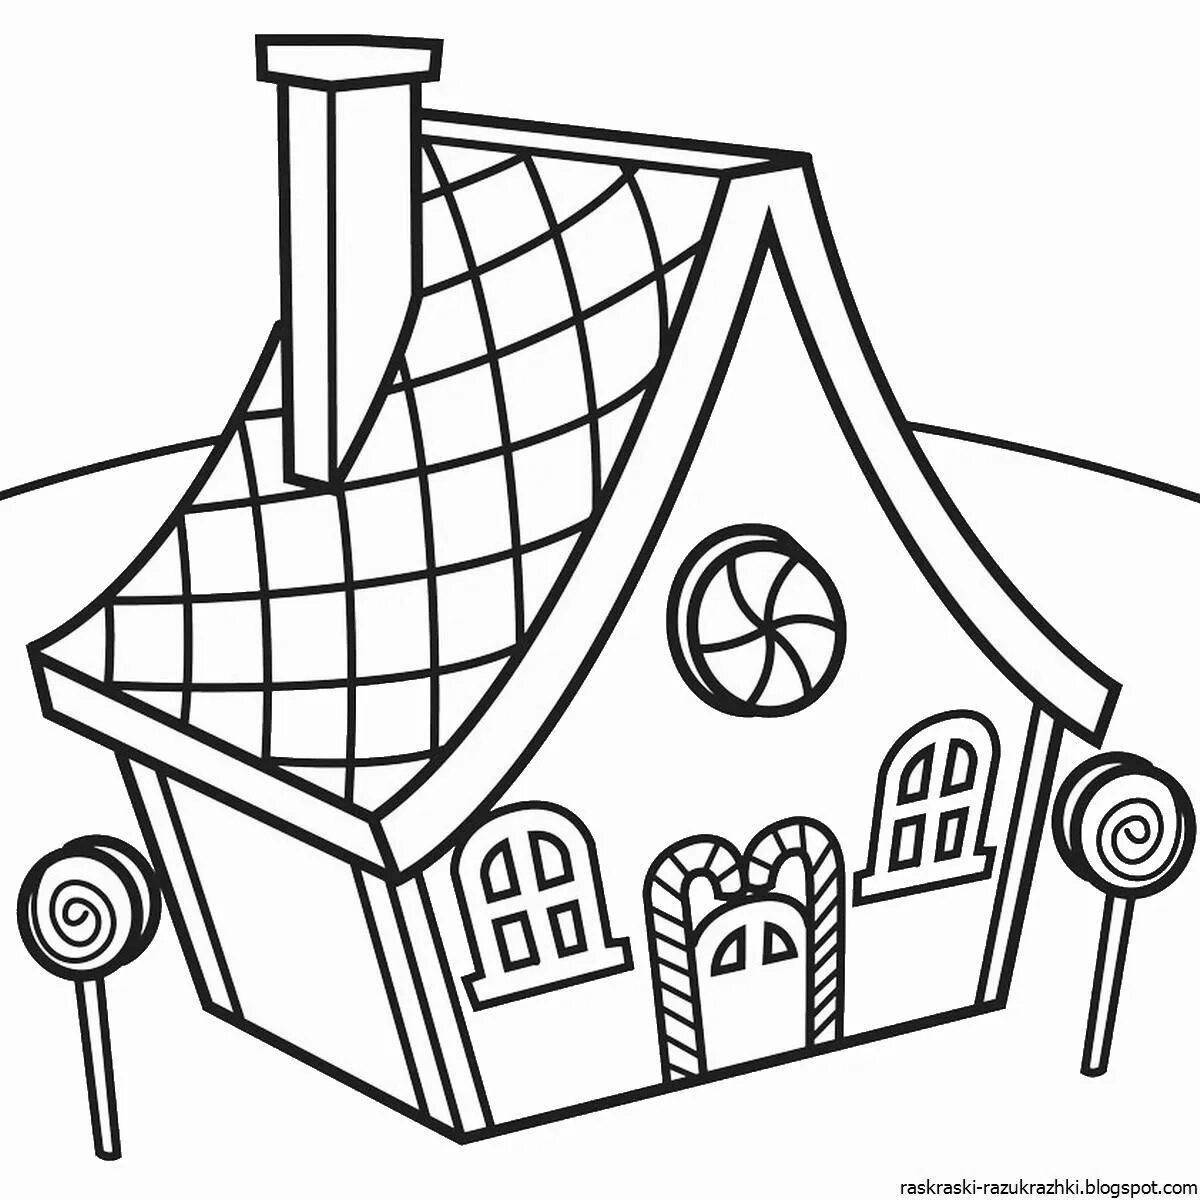 Adorable house drawing for kids